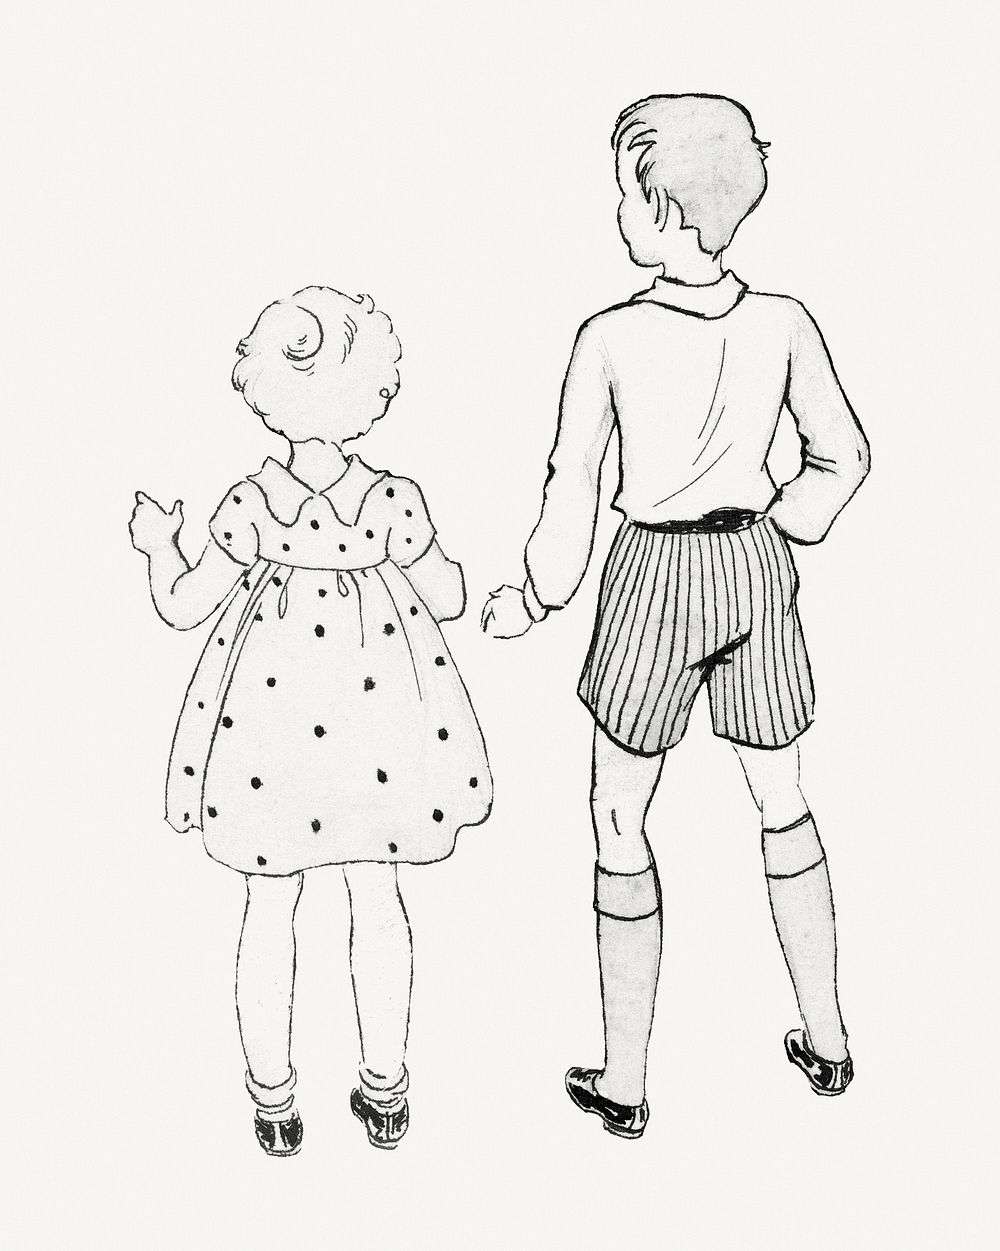 Boy and girl siblings drawing collage element psd.  Remastered by rawpixel